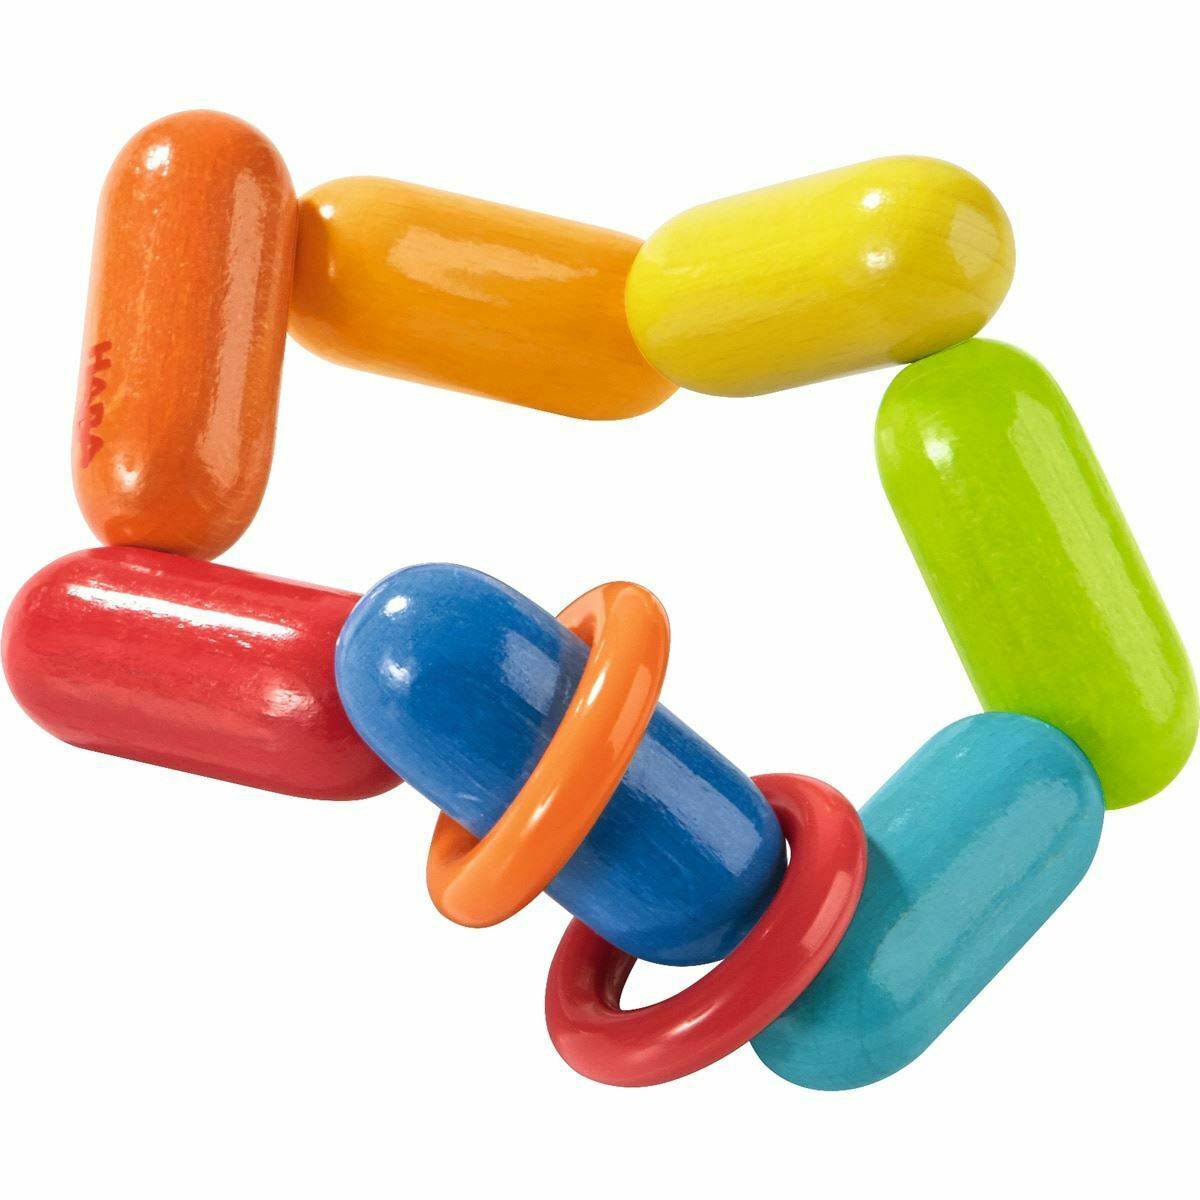 Haba Haba Dilly Dally Wooden Rattle with Plastic Rings - blueottertoys-HB303017